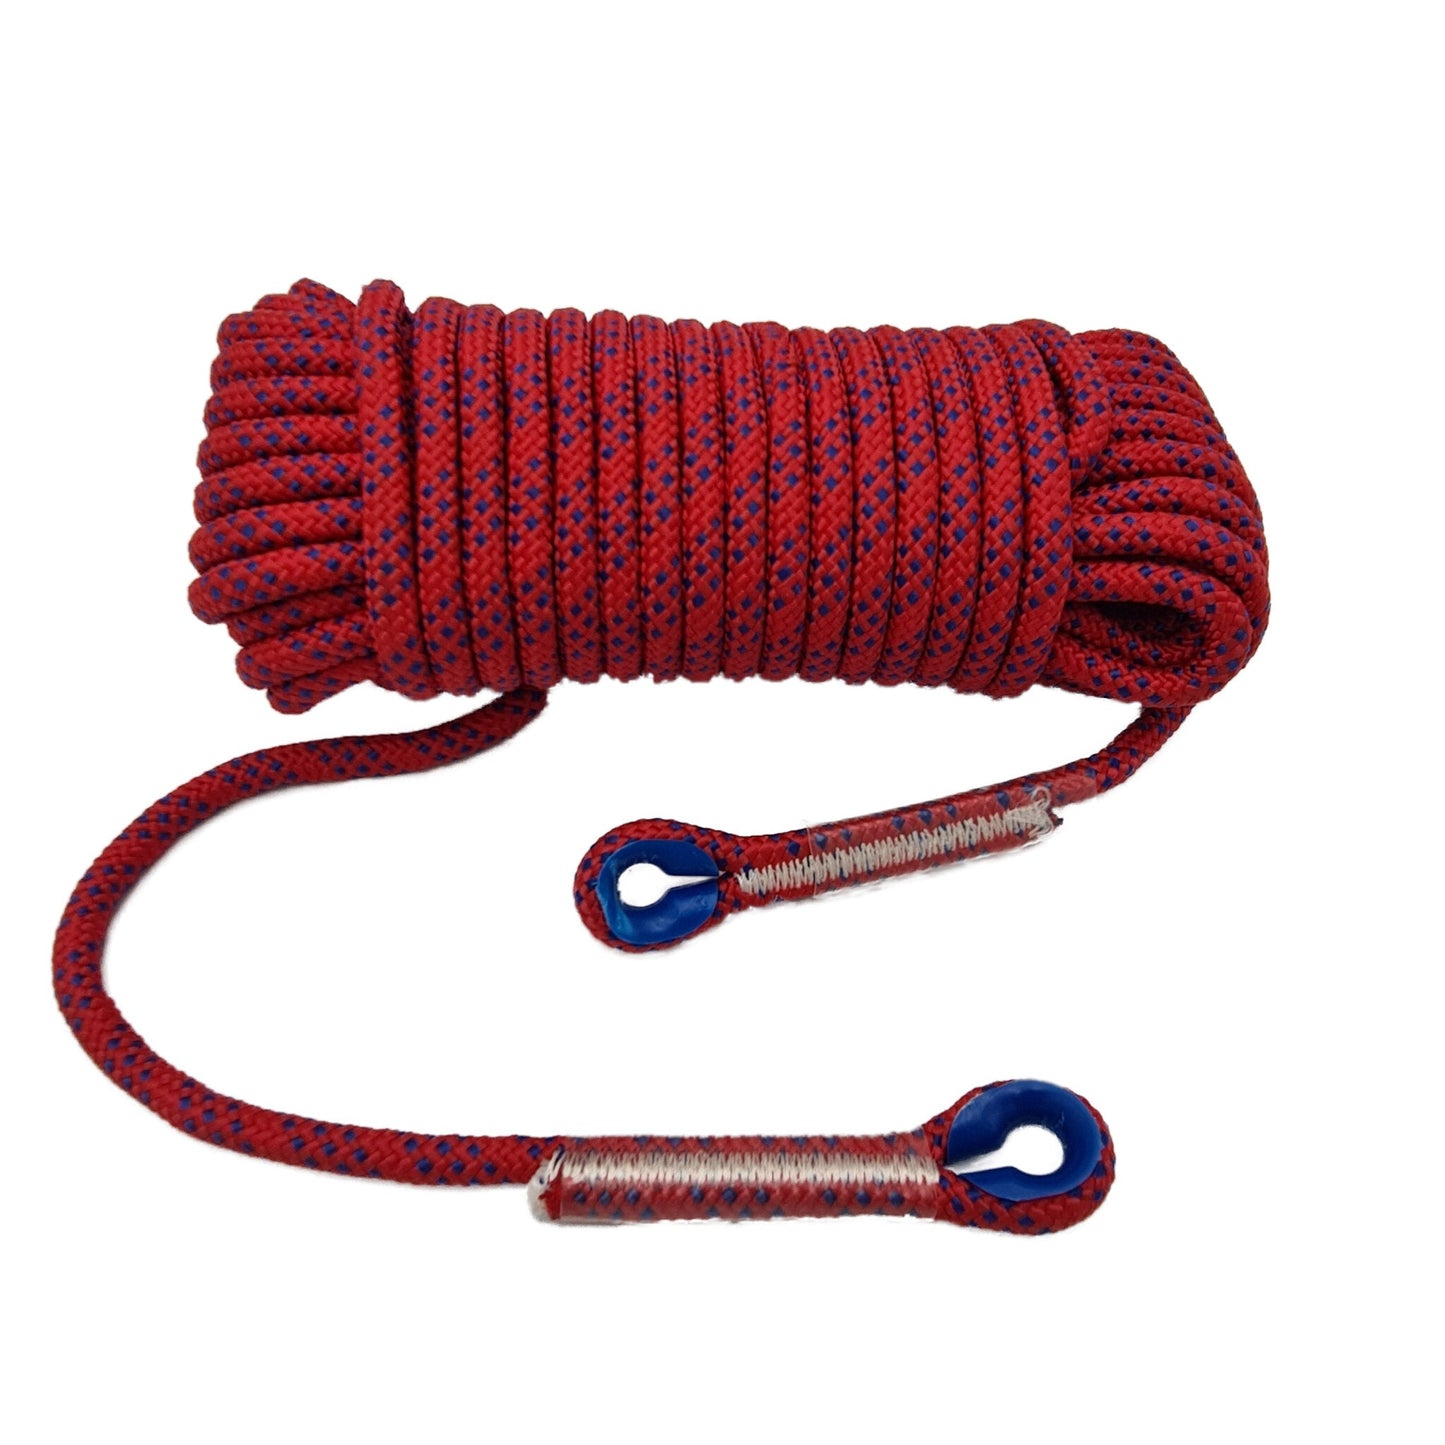 10mm x 20m rope for magnet fishing